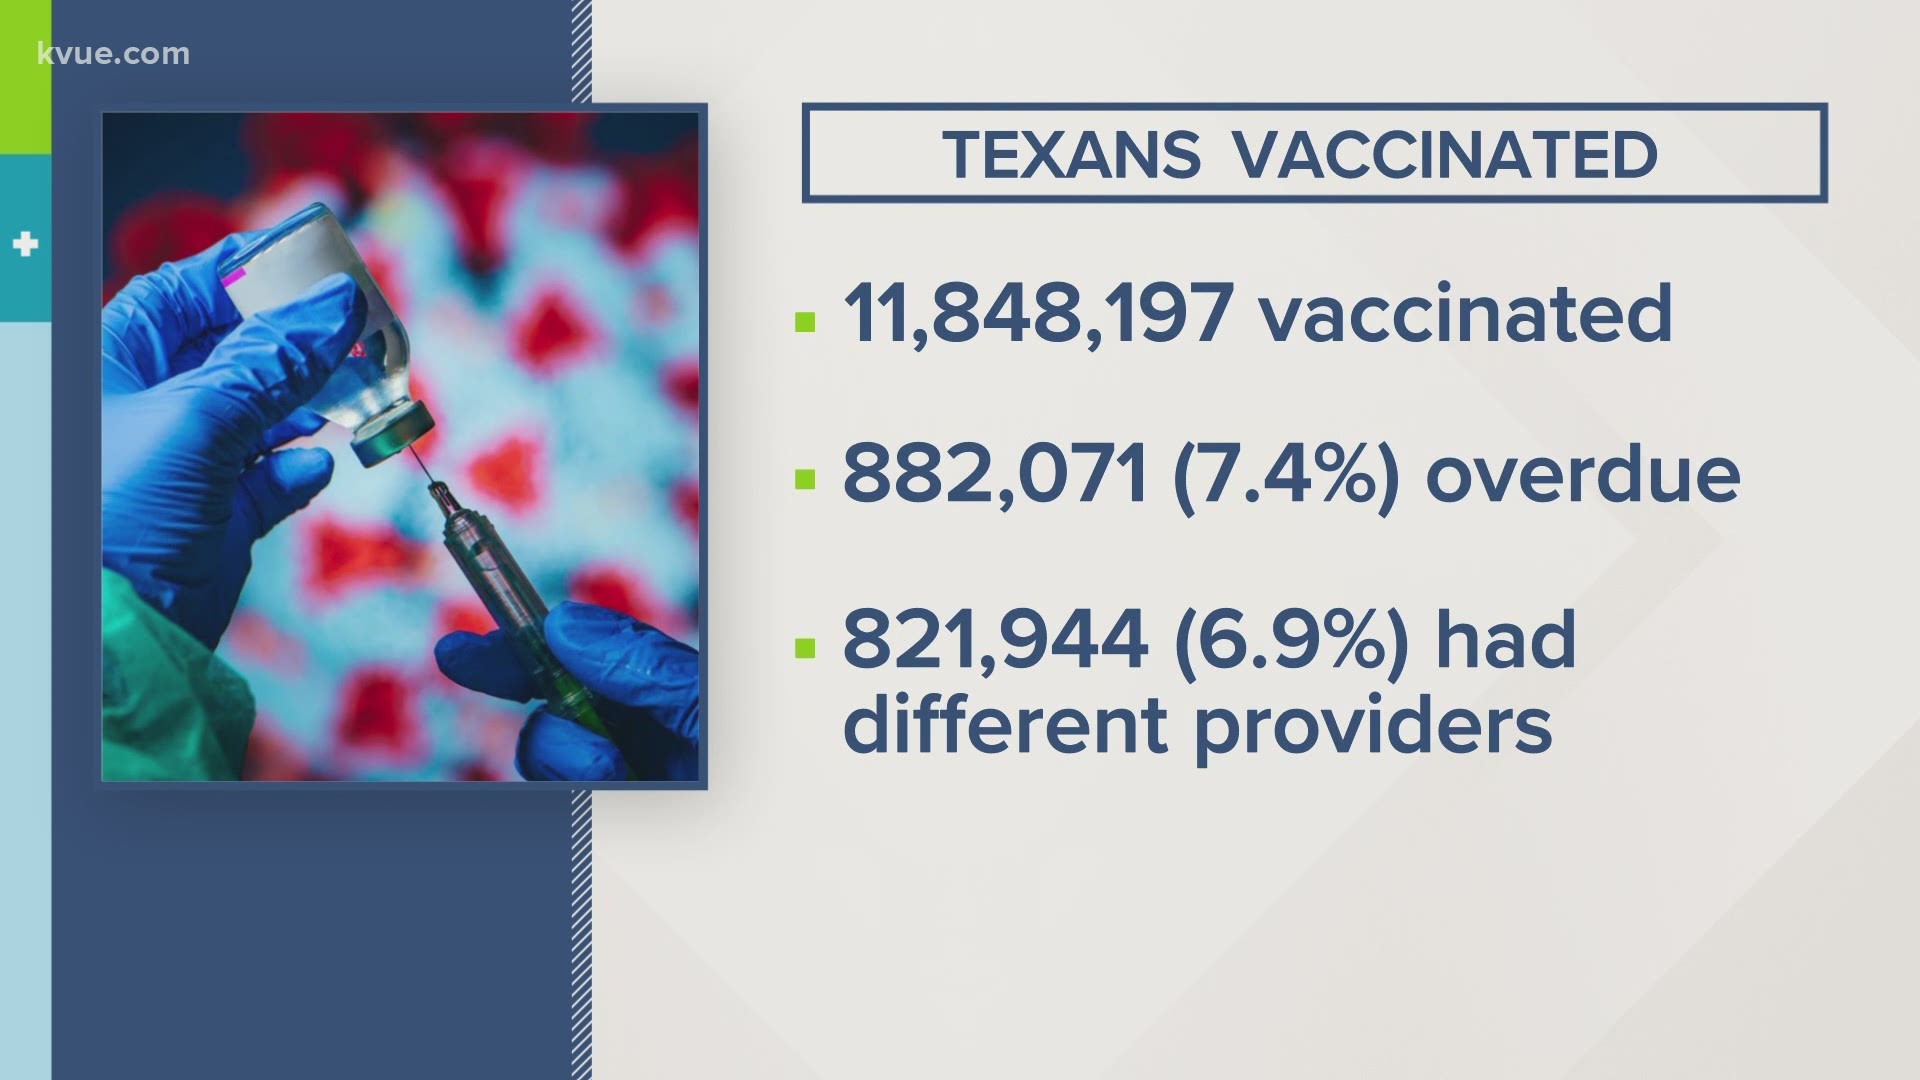 About 7.4% of all vaccinated Texans are overdue for their second COVID-19 vaccine shot, according to data from the Department of State Health Services.